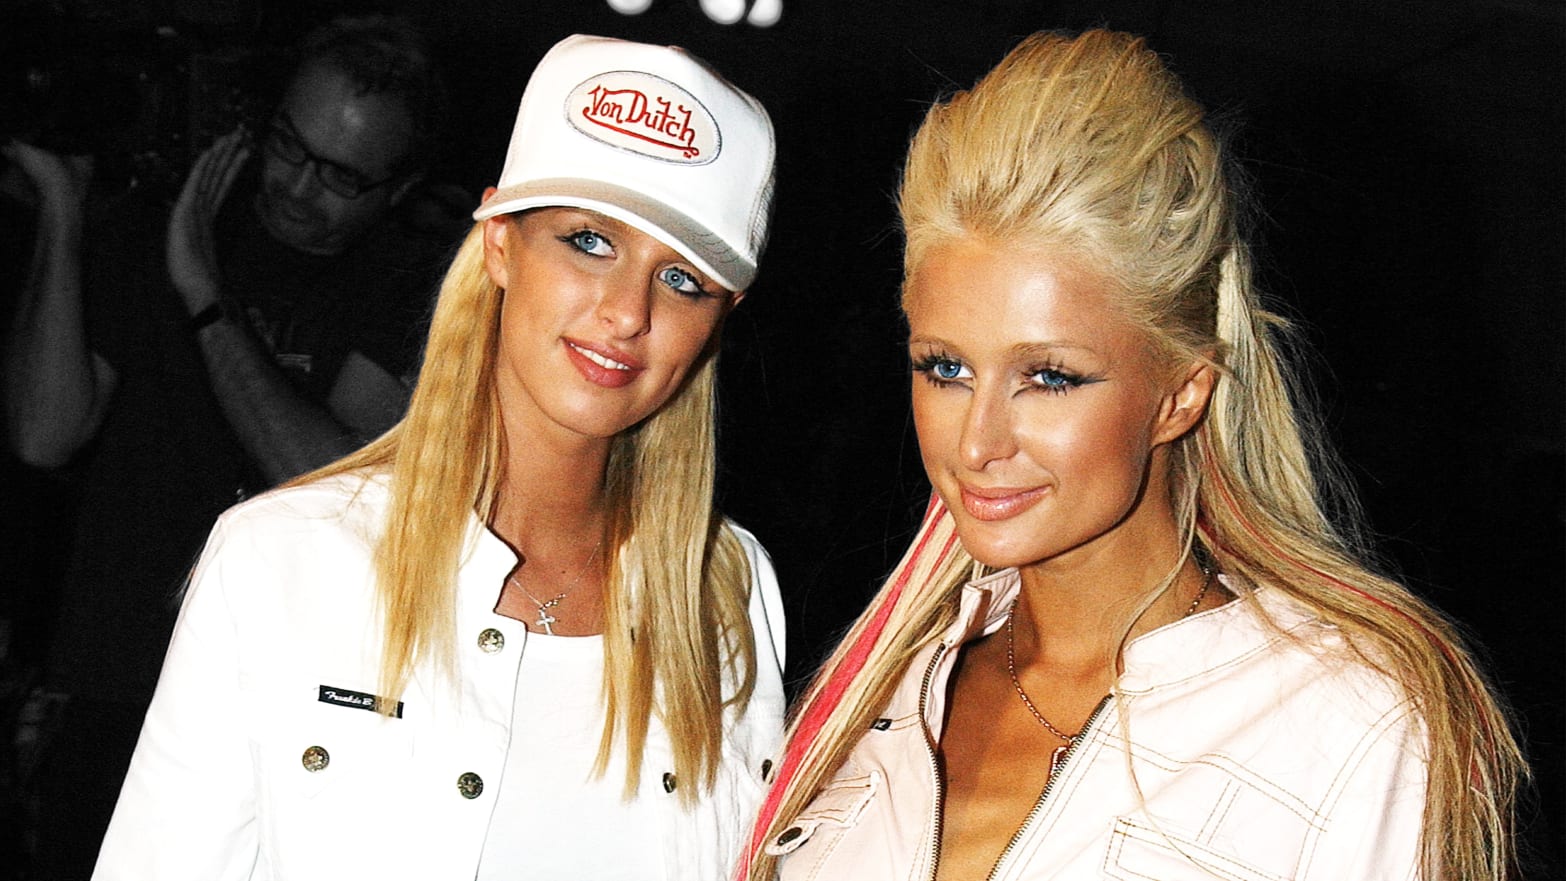 How Von Dutch's Trucker Hat Empire Ended in Chaos and Death